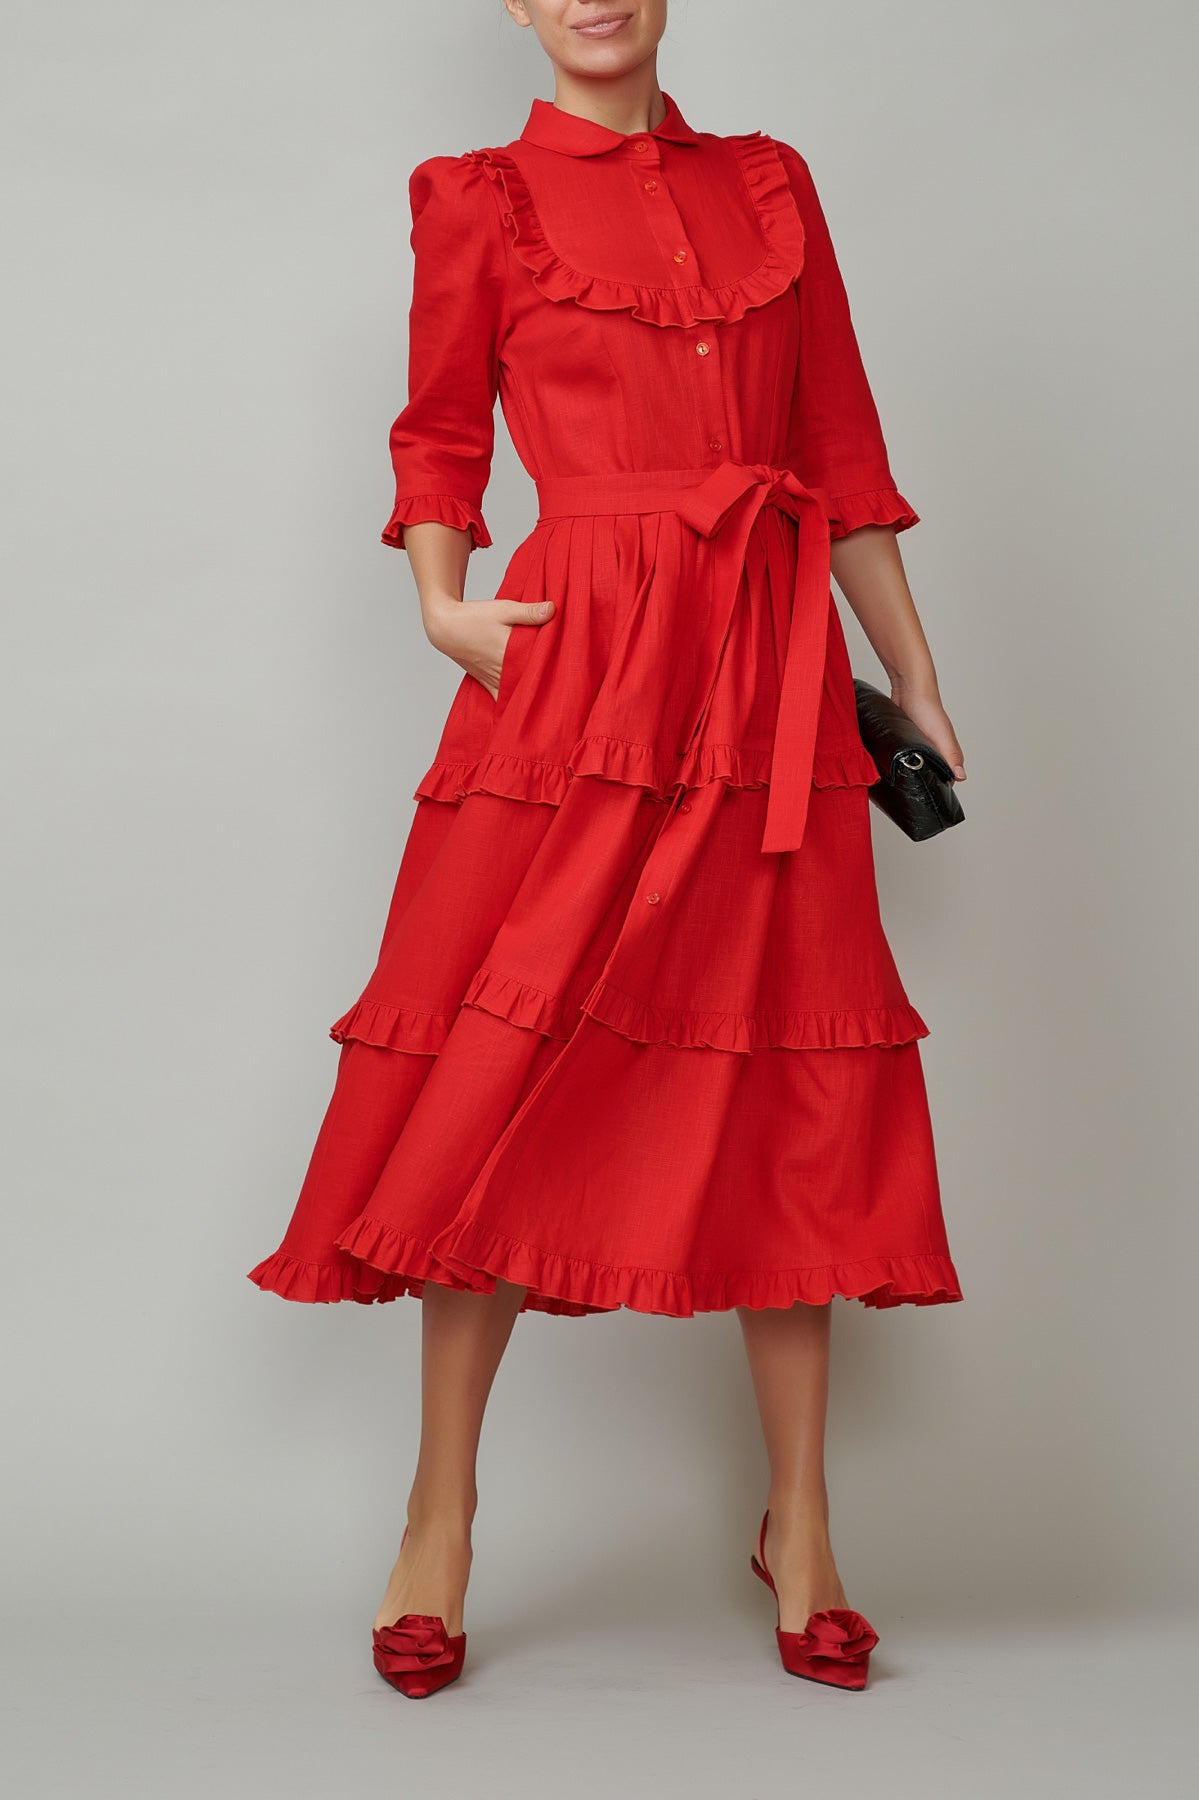 Shirt dress with round placket and frills, made of red linen